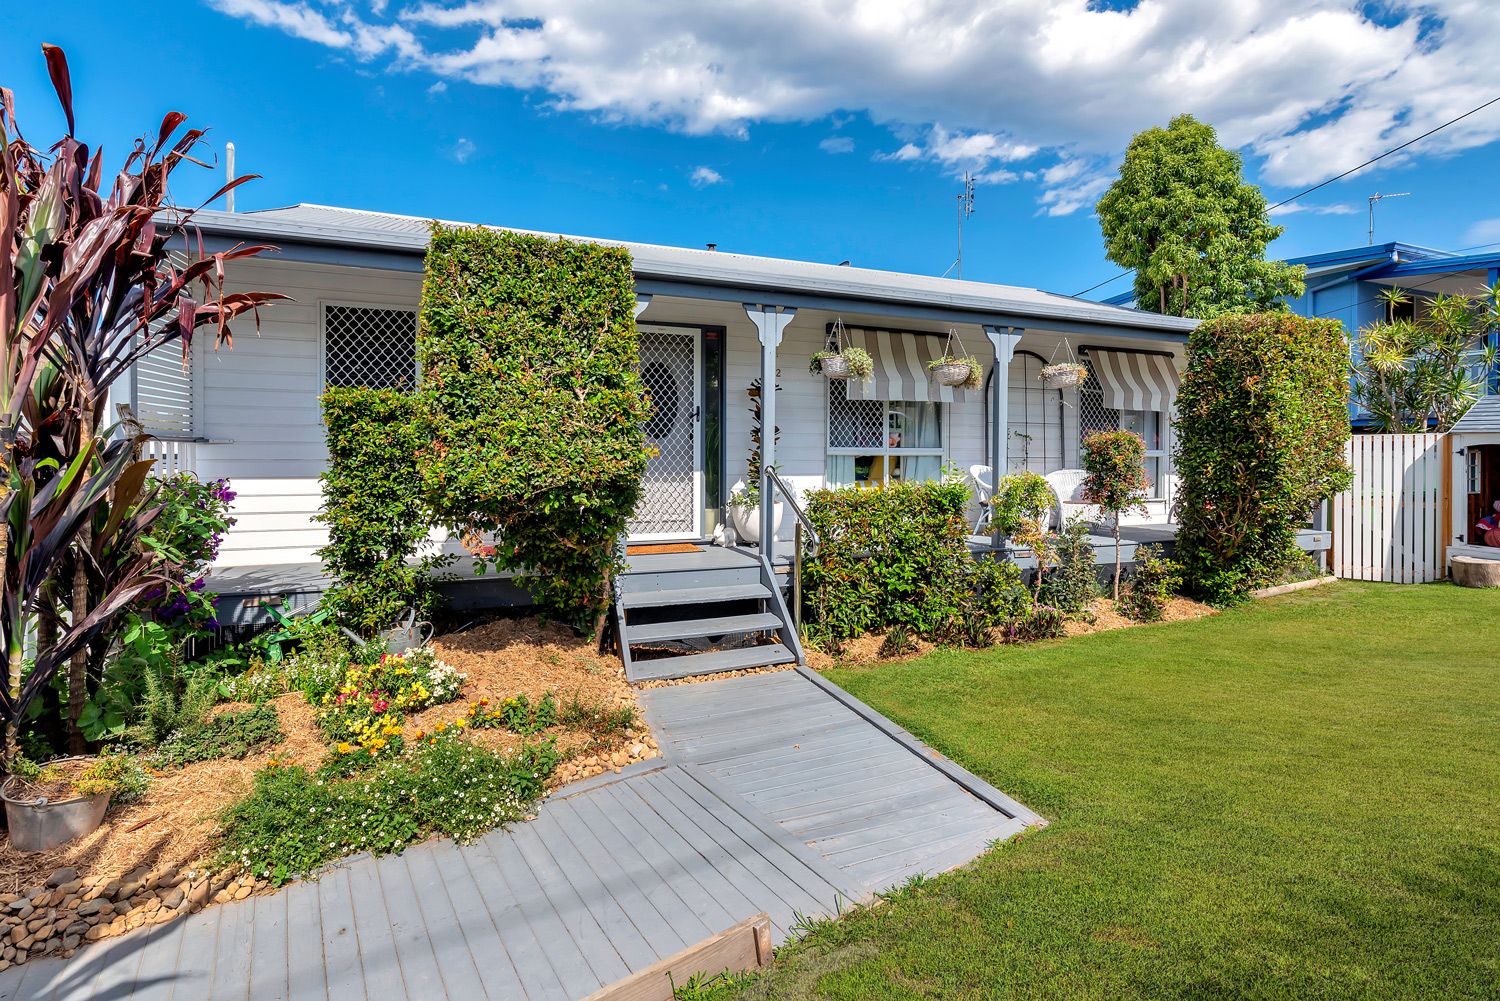 12 Aaron Street, Coomera, Property History & Address Research